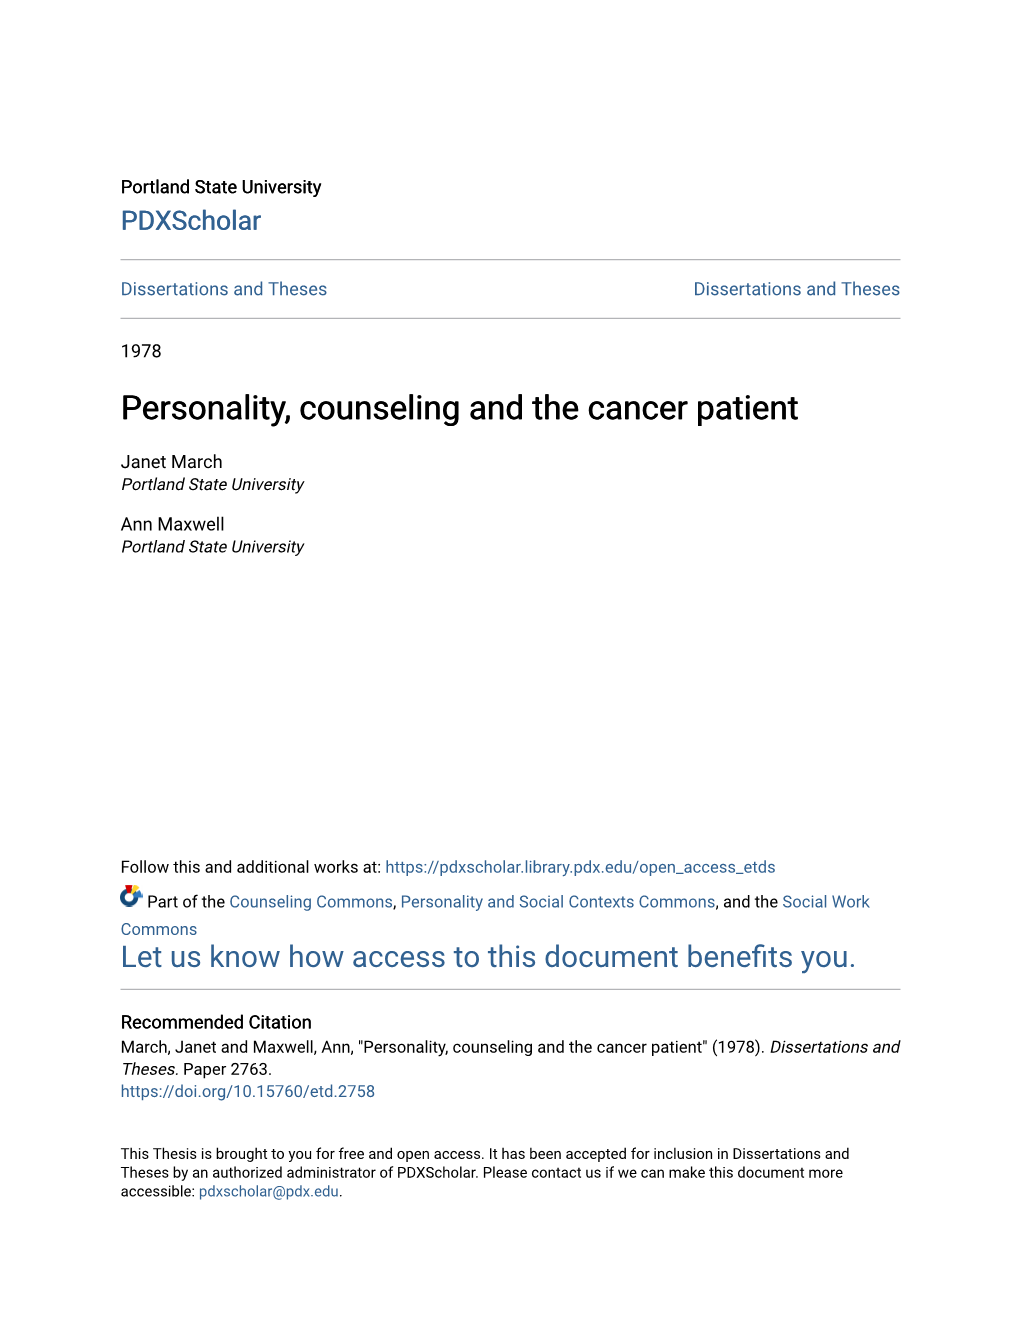 Personality, Counseling and the Cancer Patient